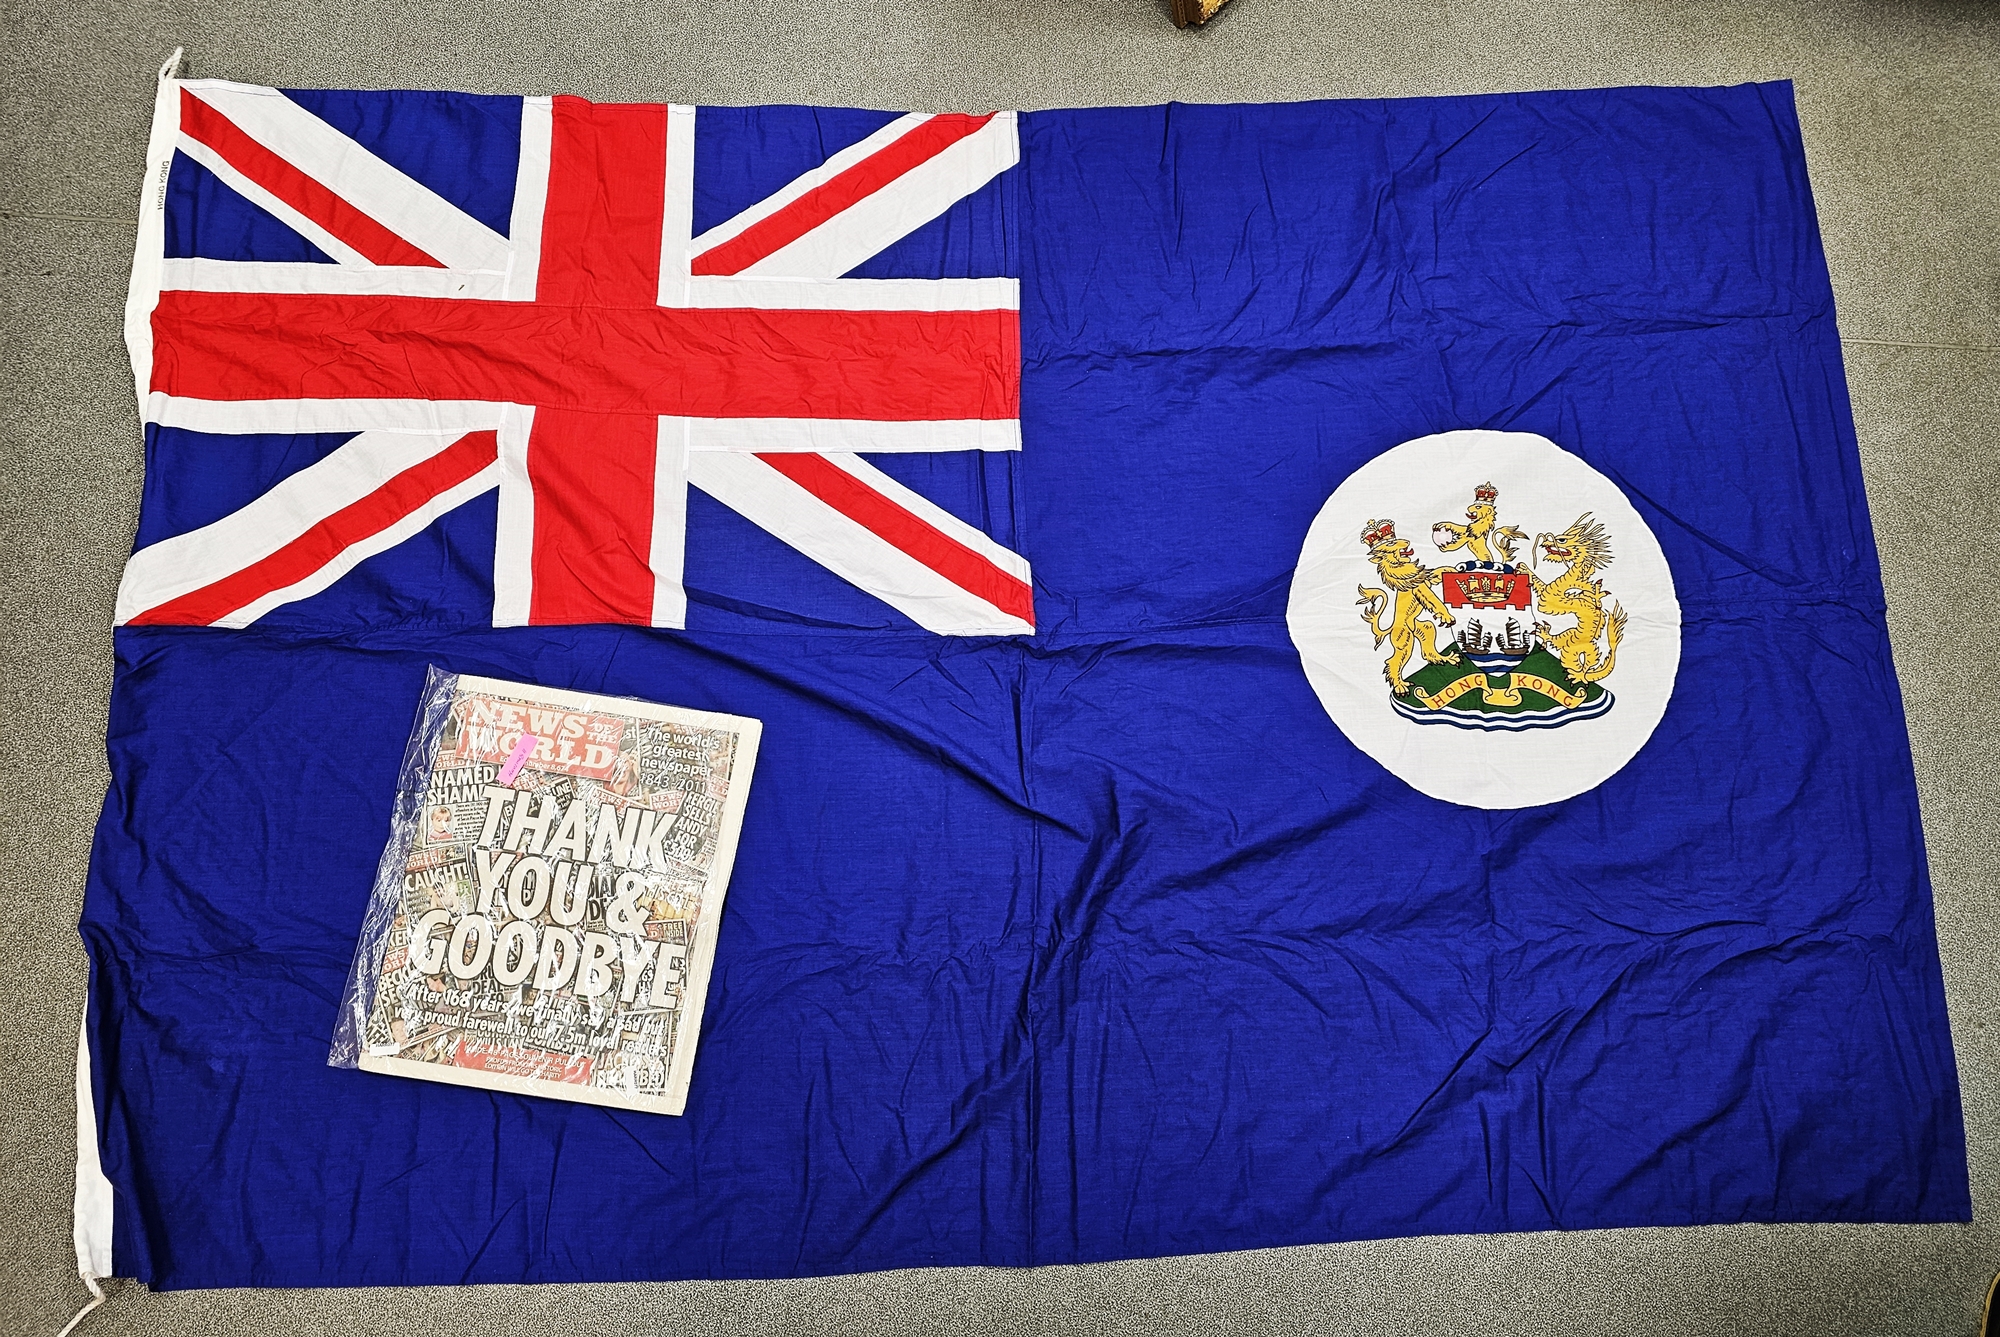 Hong Kong colony flag and a copy of News of the World 10th July 2011 documenting the handover of